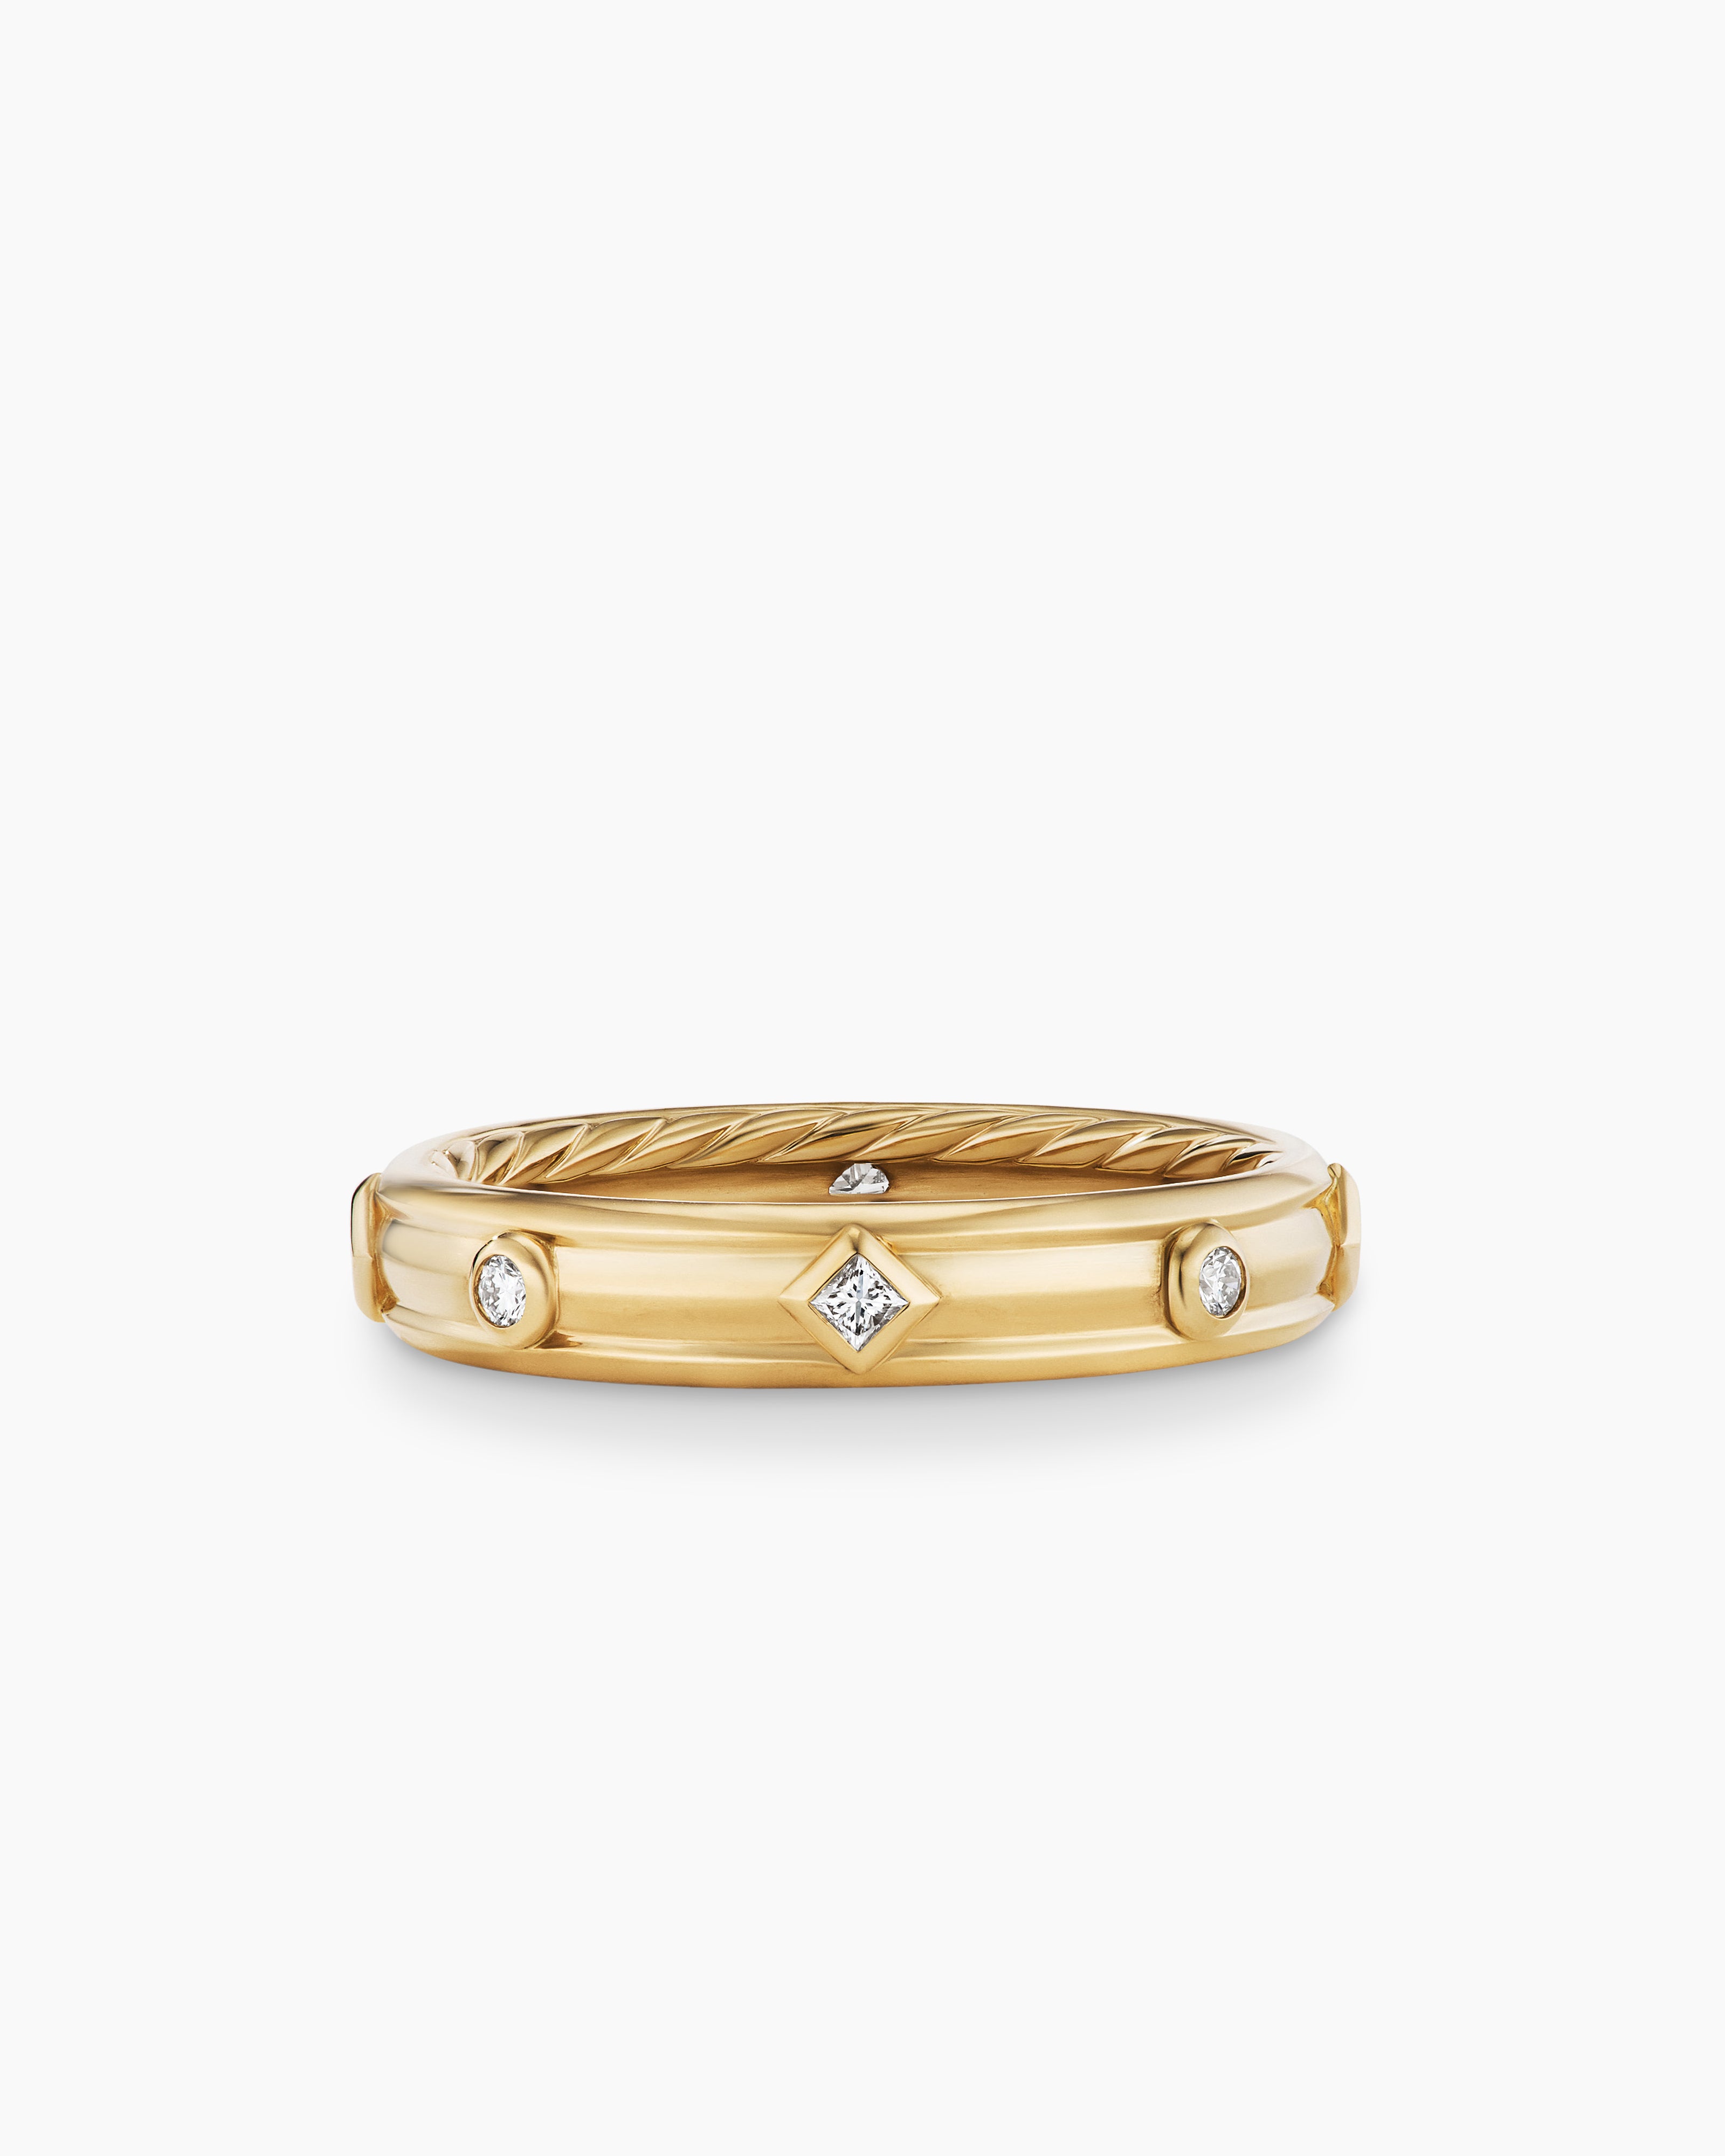 Renaissance Ring in 18K Yellow Gold with Diamonds, 2.3mm | David